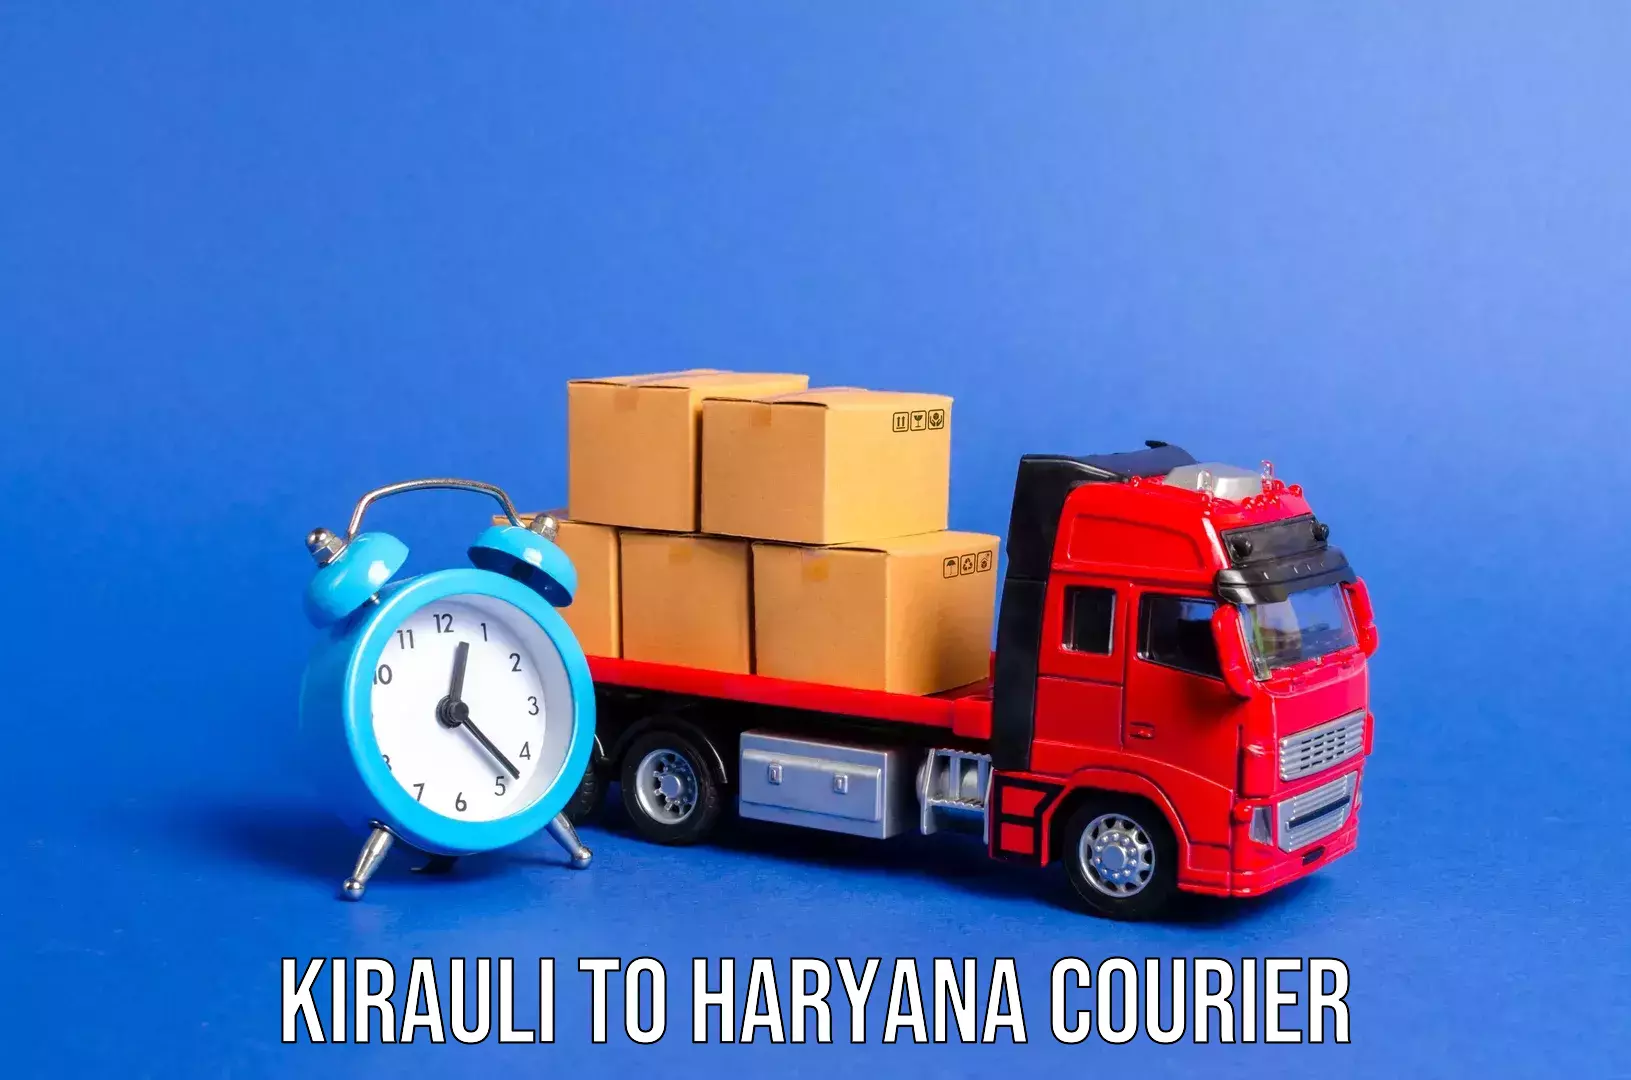 Instant baggage transport quote Kirauli to NCR Haryana